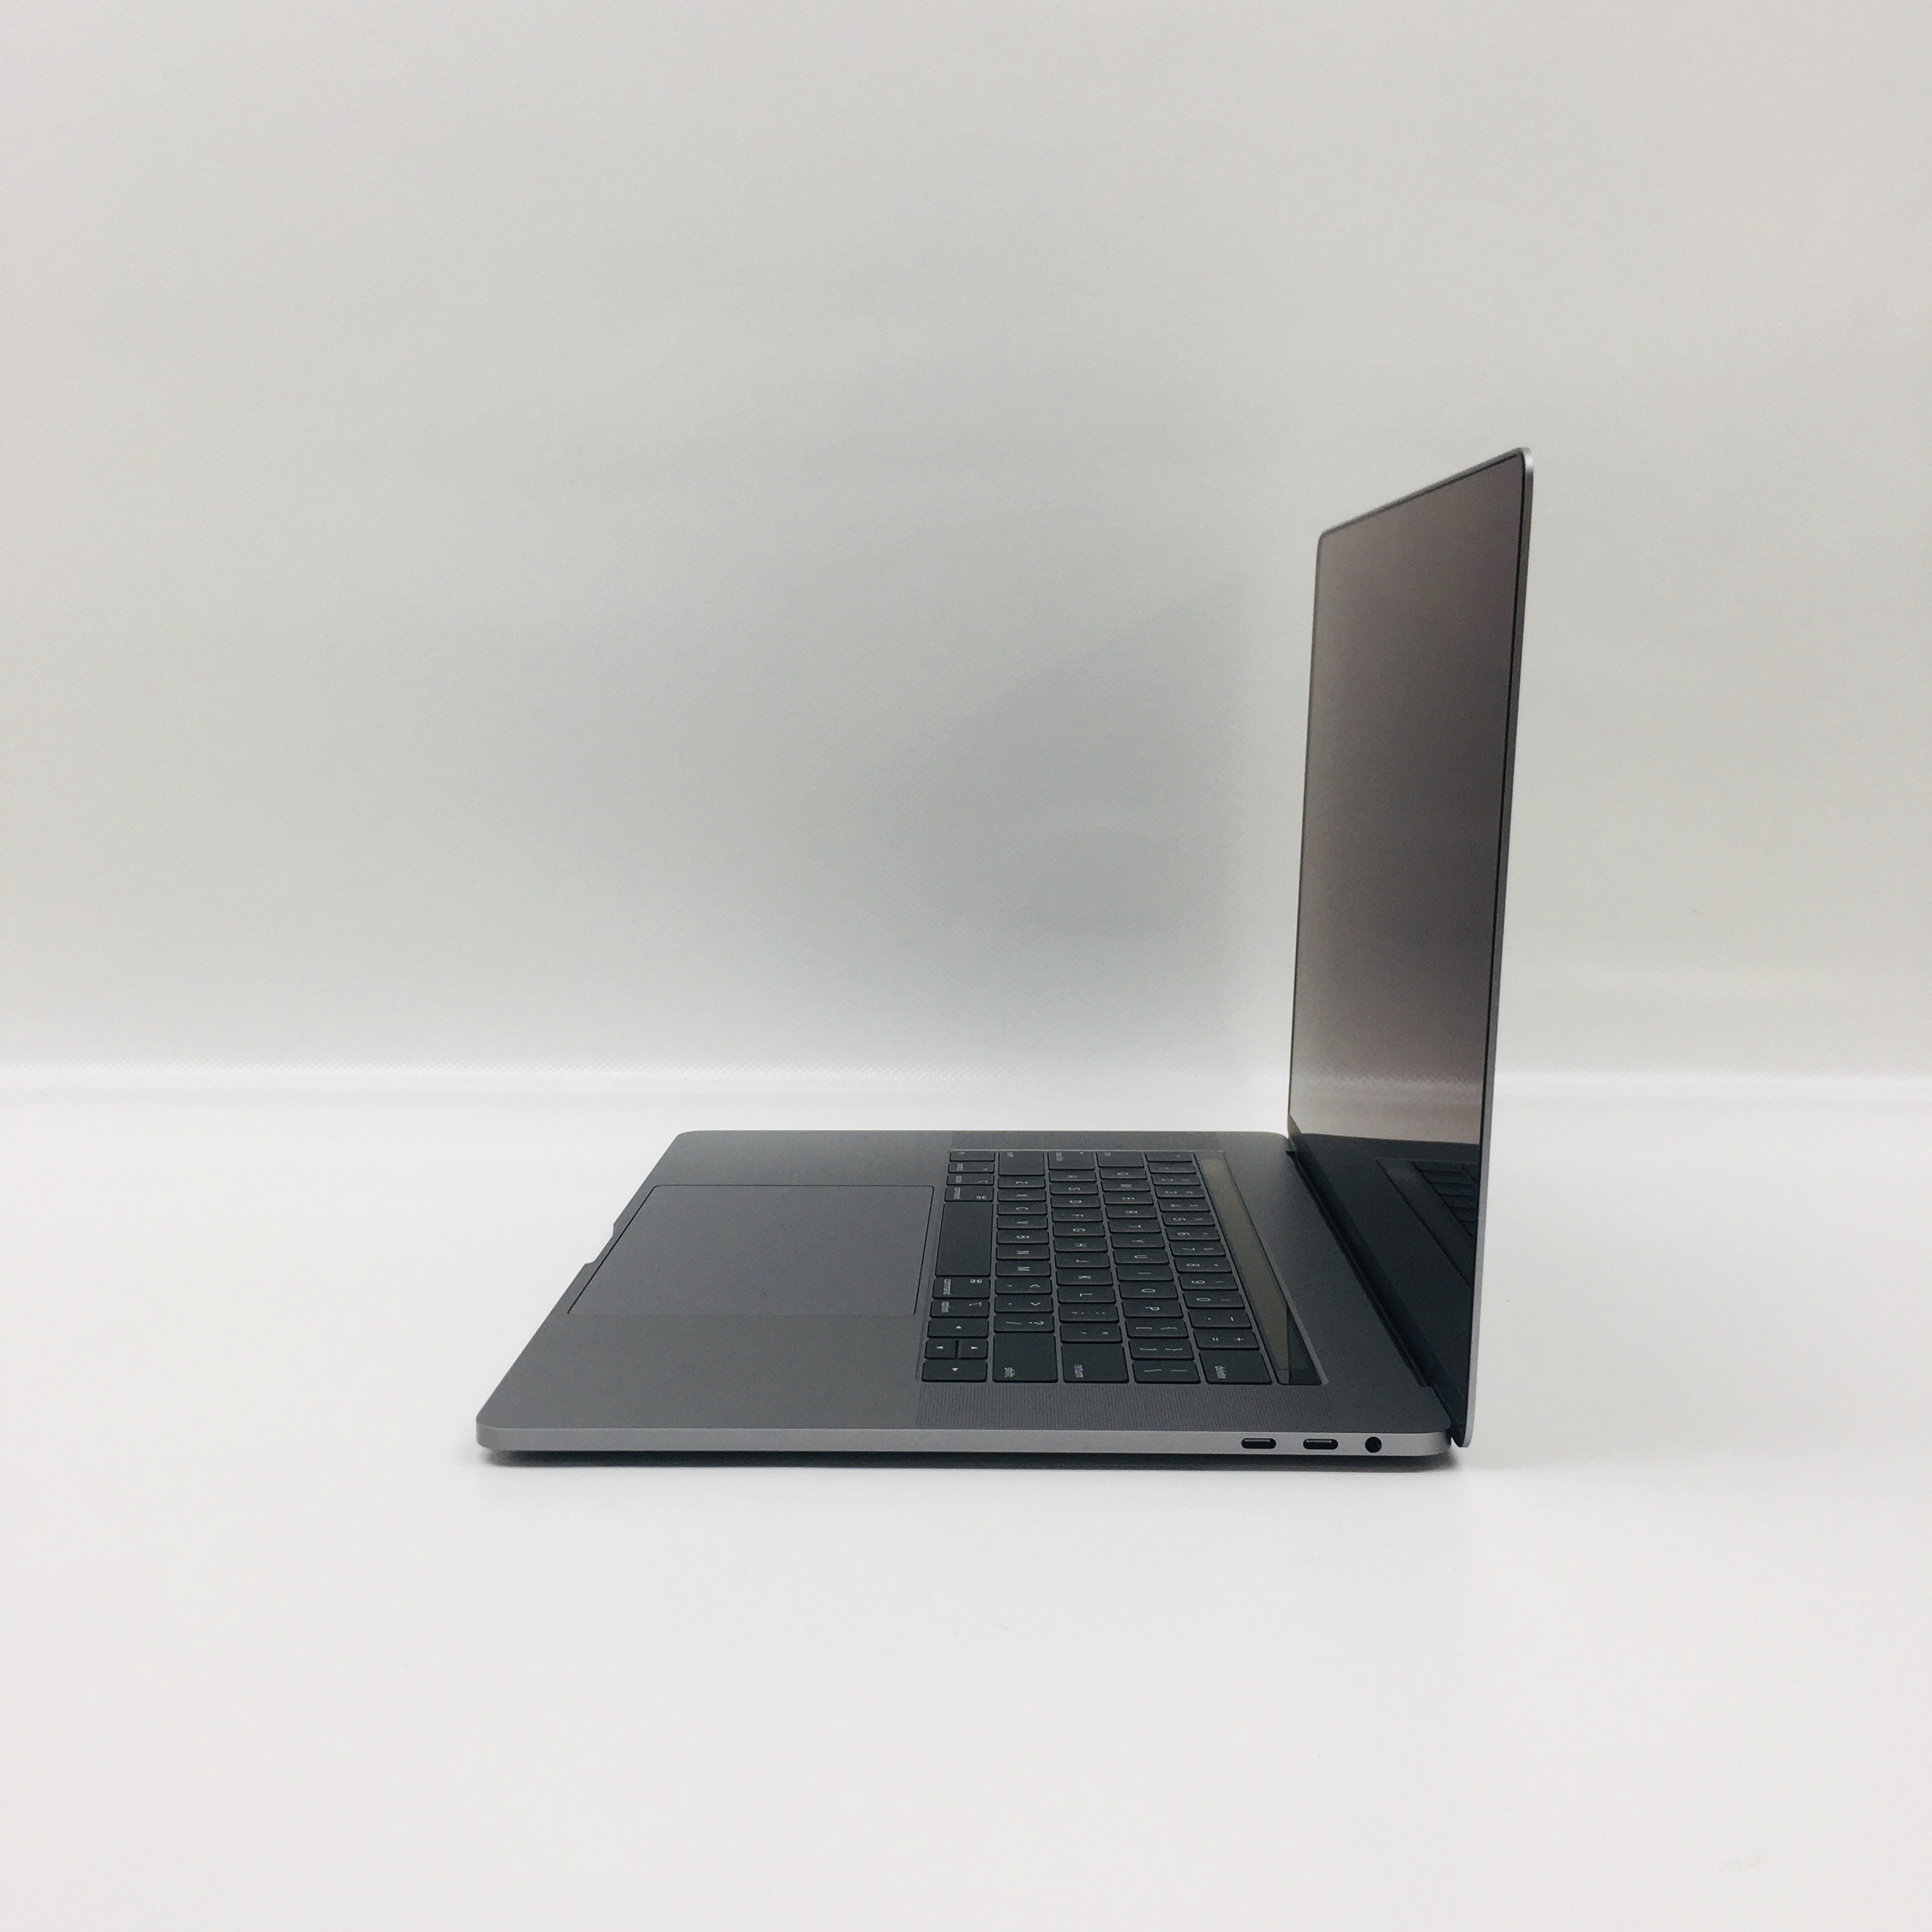 MacBook Pro 15" Touch Bar Mid 2018 (Intel 6-Core i7 2.6 GHz 32 GB RAM 512 GB SSD), Space Gray, Intel 6-Core i7 2.6 GHz, 32 GB RAM, 512 GB SSD, image 2